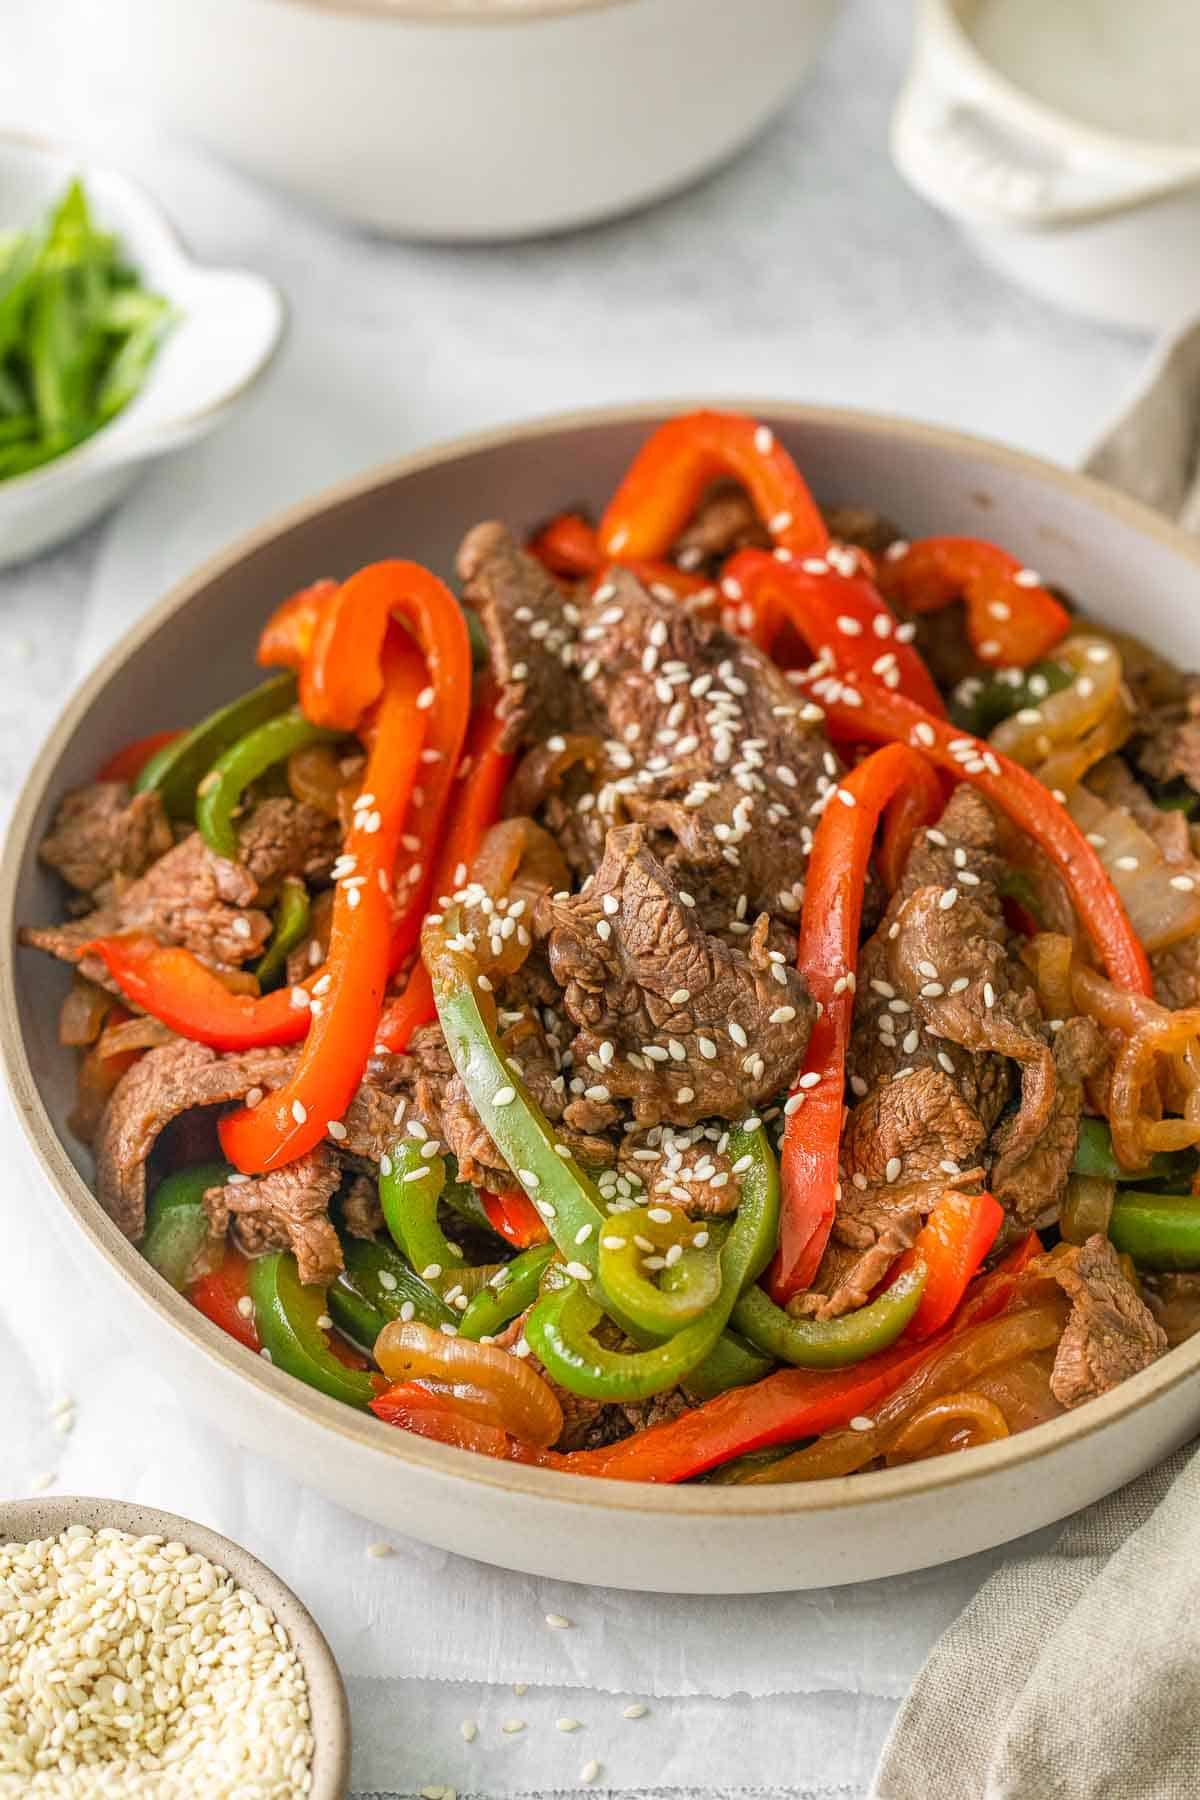 Bowl of pepper steak with green and red bell peppers topped with sesame seeds.